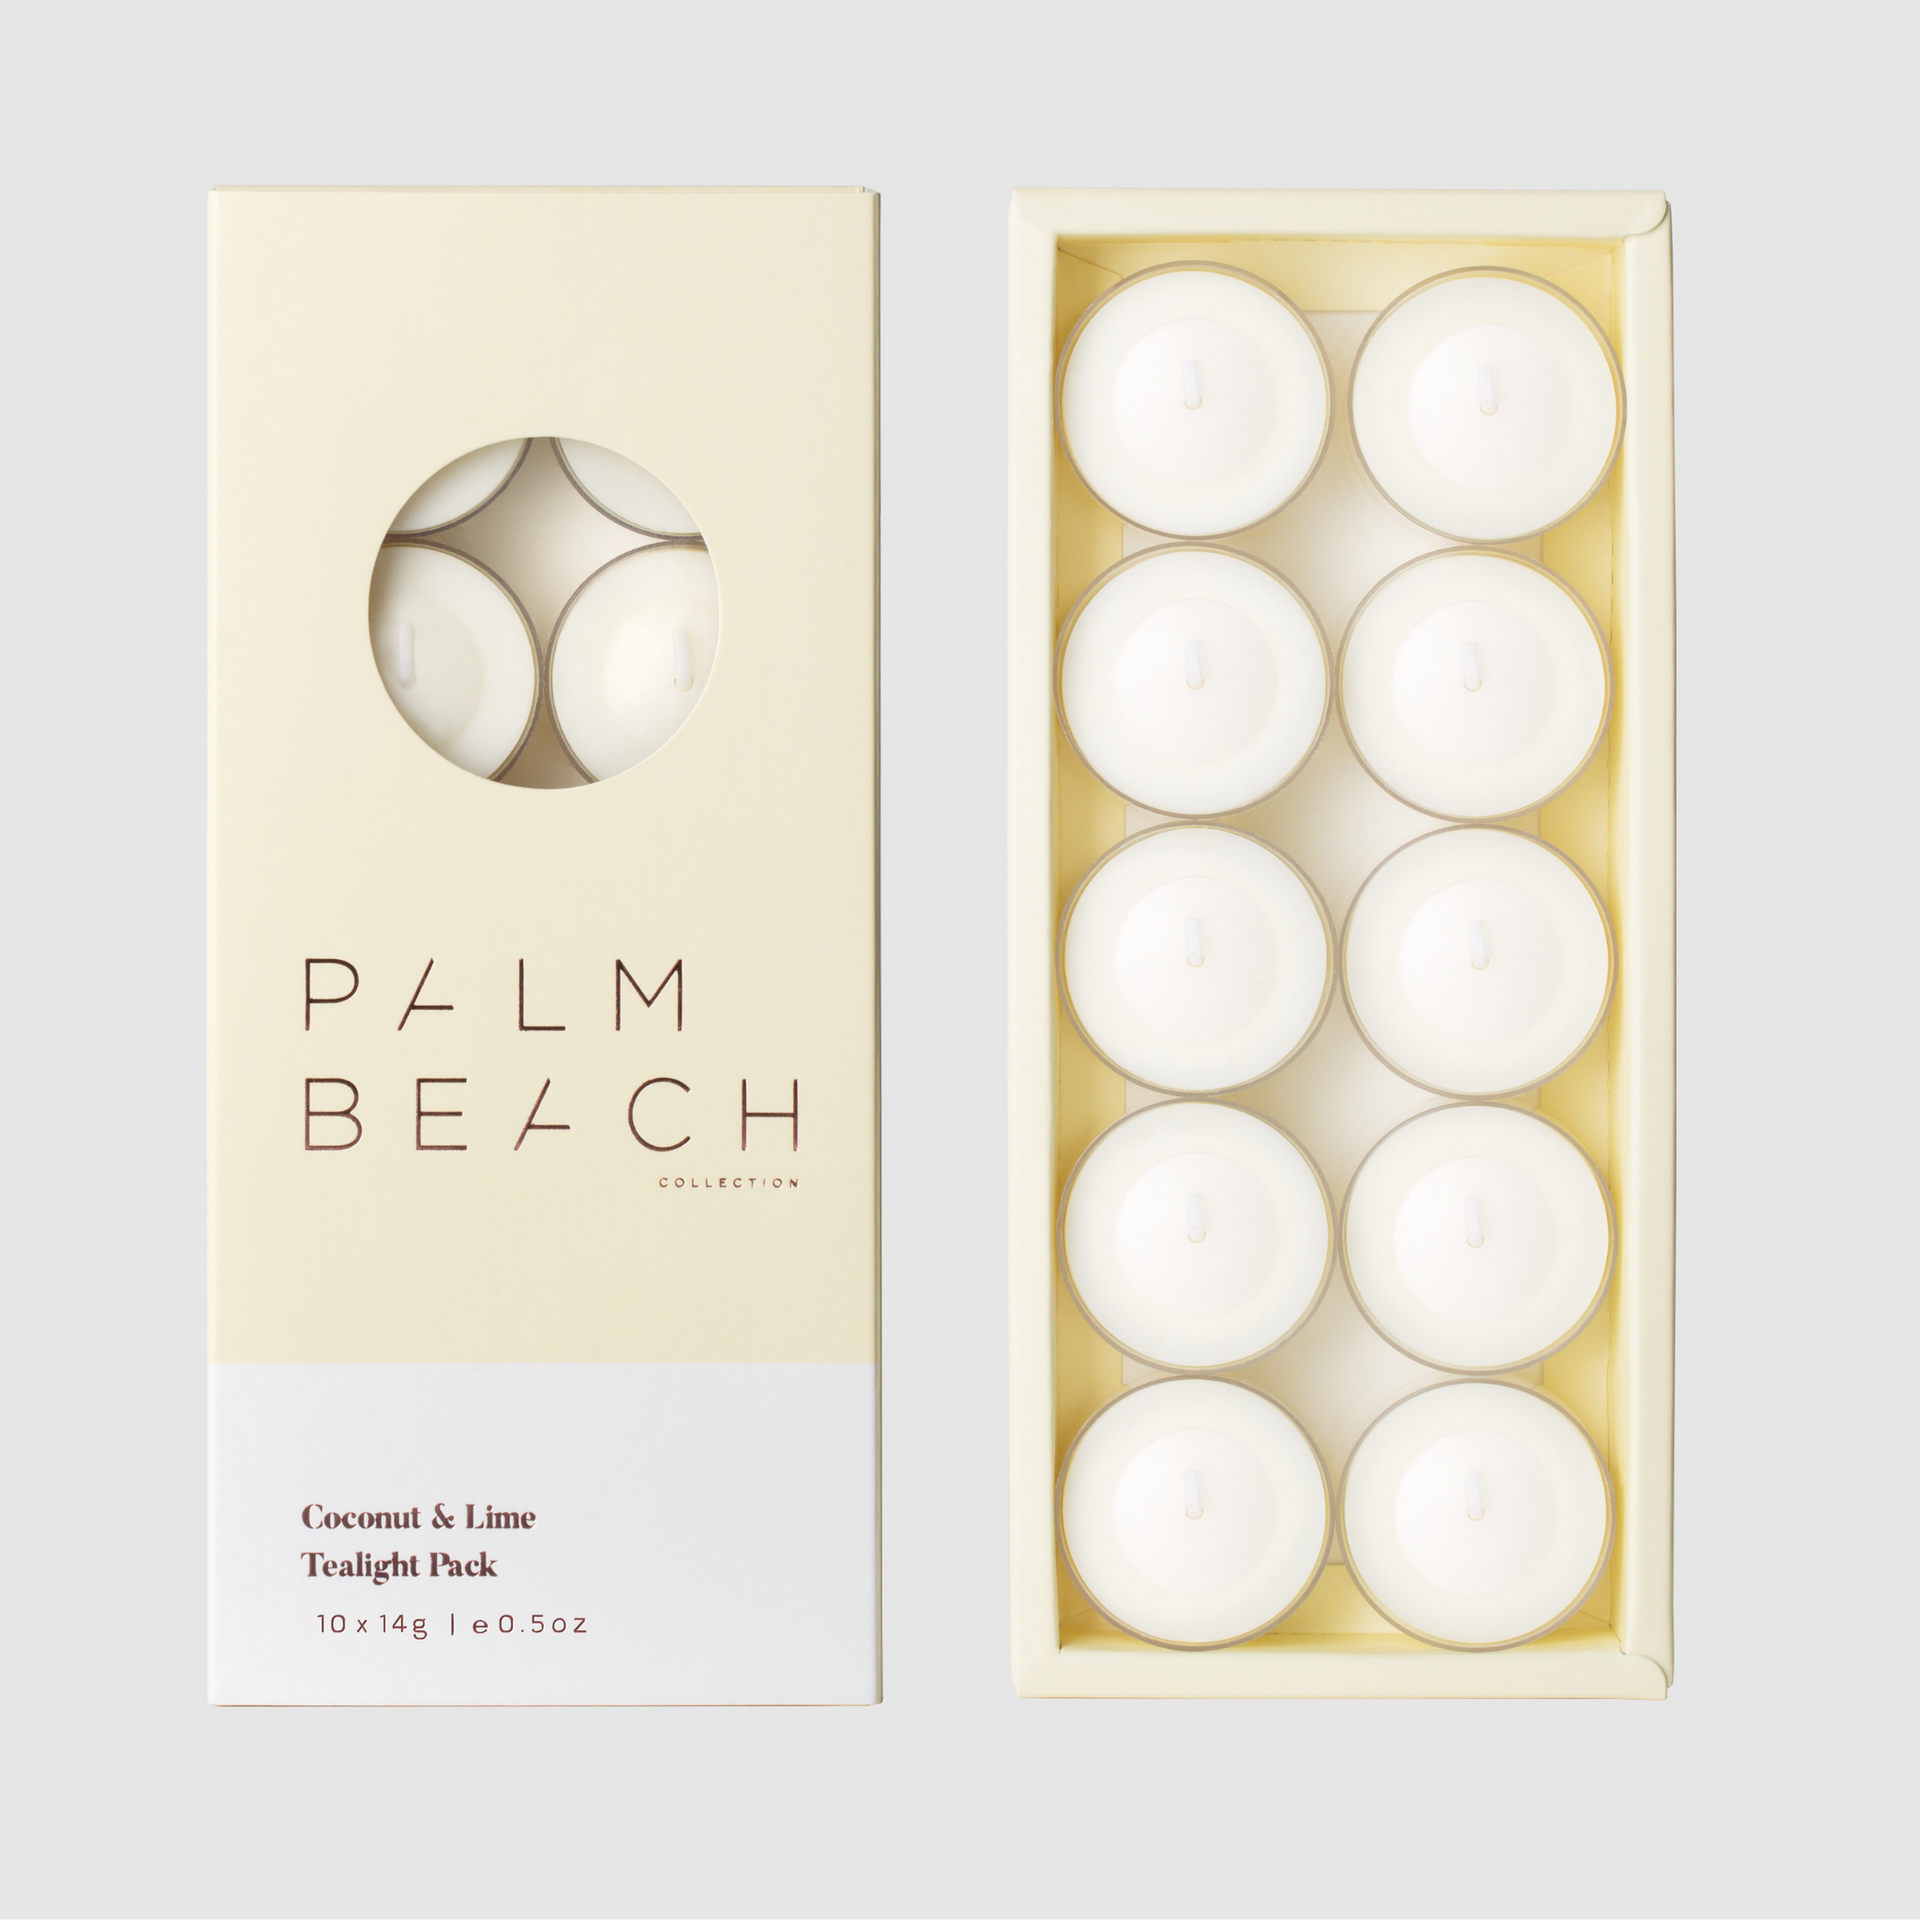 Coconut & Lime Tealight Pack